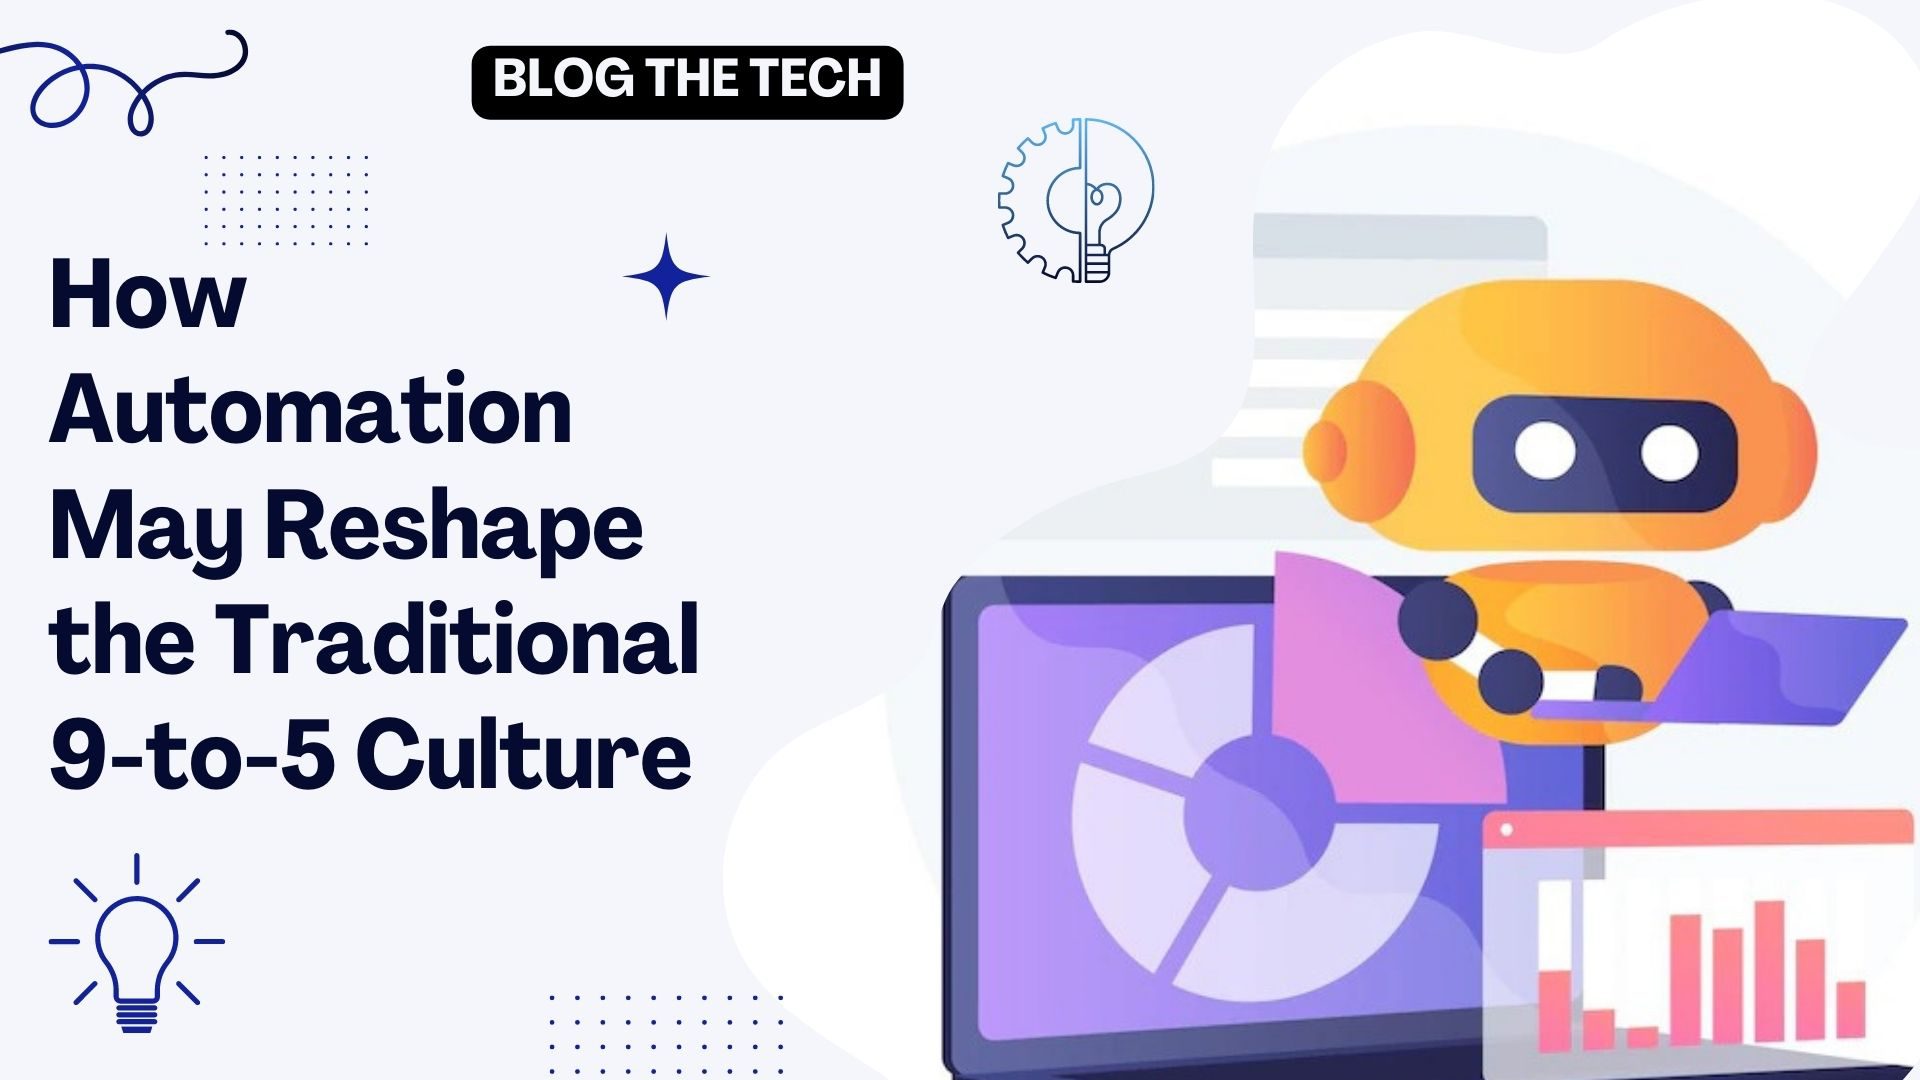 How AuHow Automation May Reshape the Traditional 9-to-5 Culturetomation May Reshape the Traditional 9-to-5 Culture